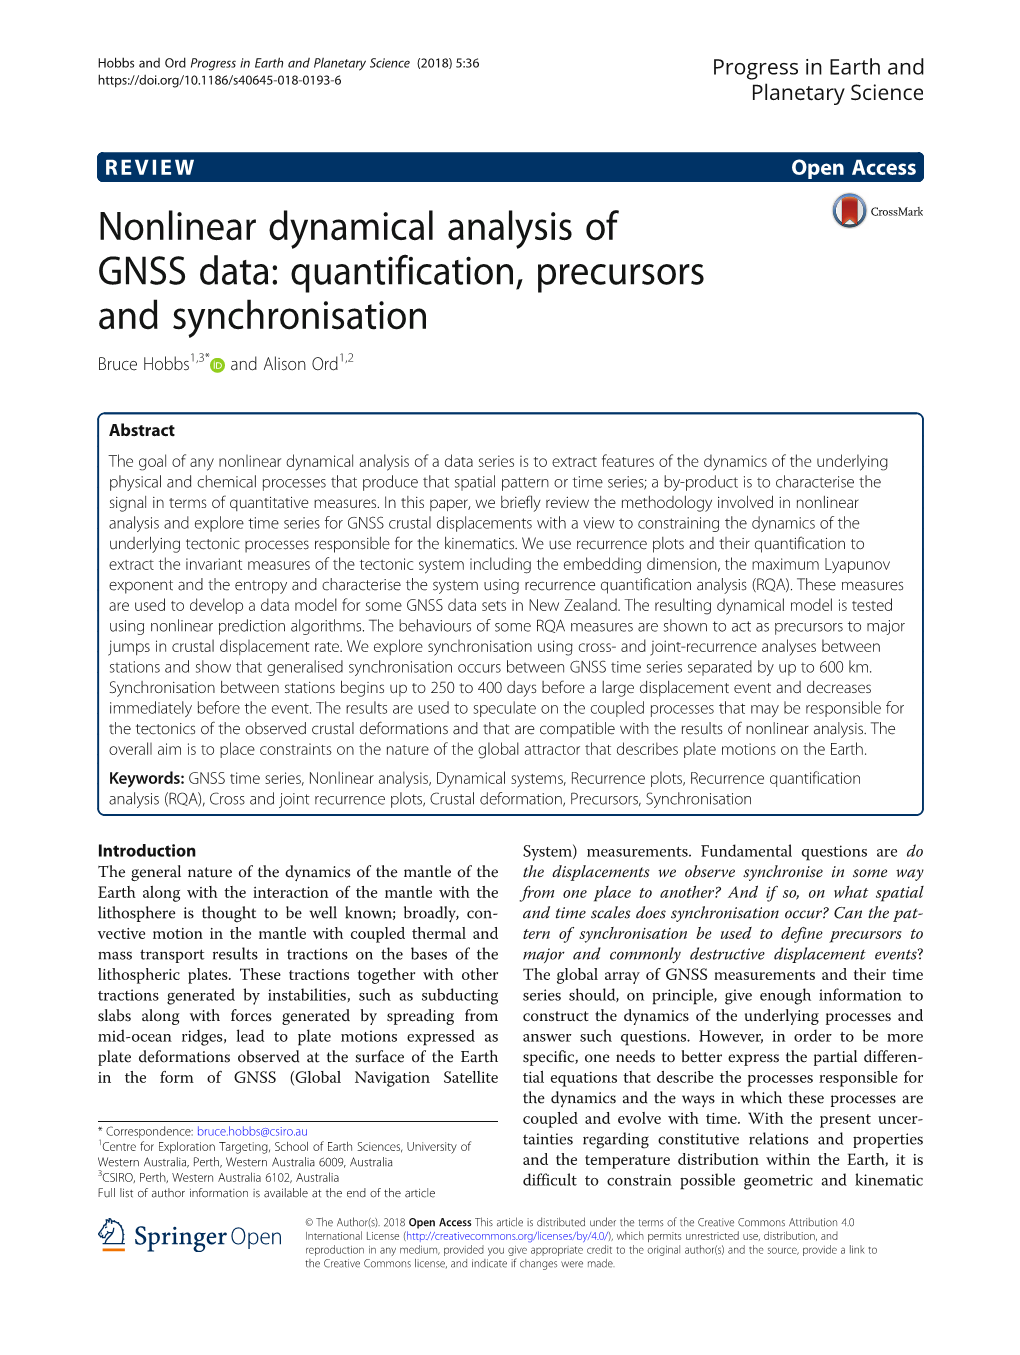 Nonlinear Dynamical Analysis of GNSS Data: Quantification, Precursors and Synchronisation Bruce Hobbs1,3* and Alison Ord1,2